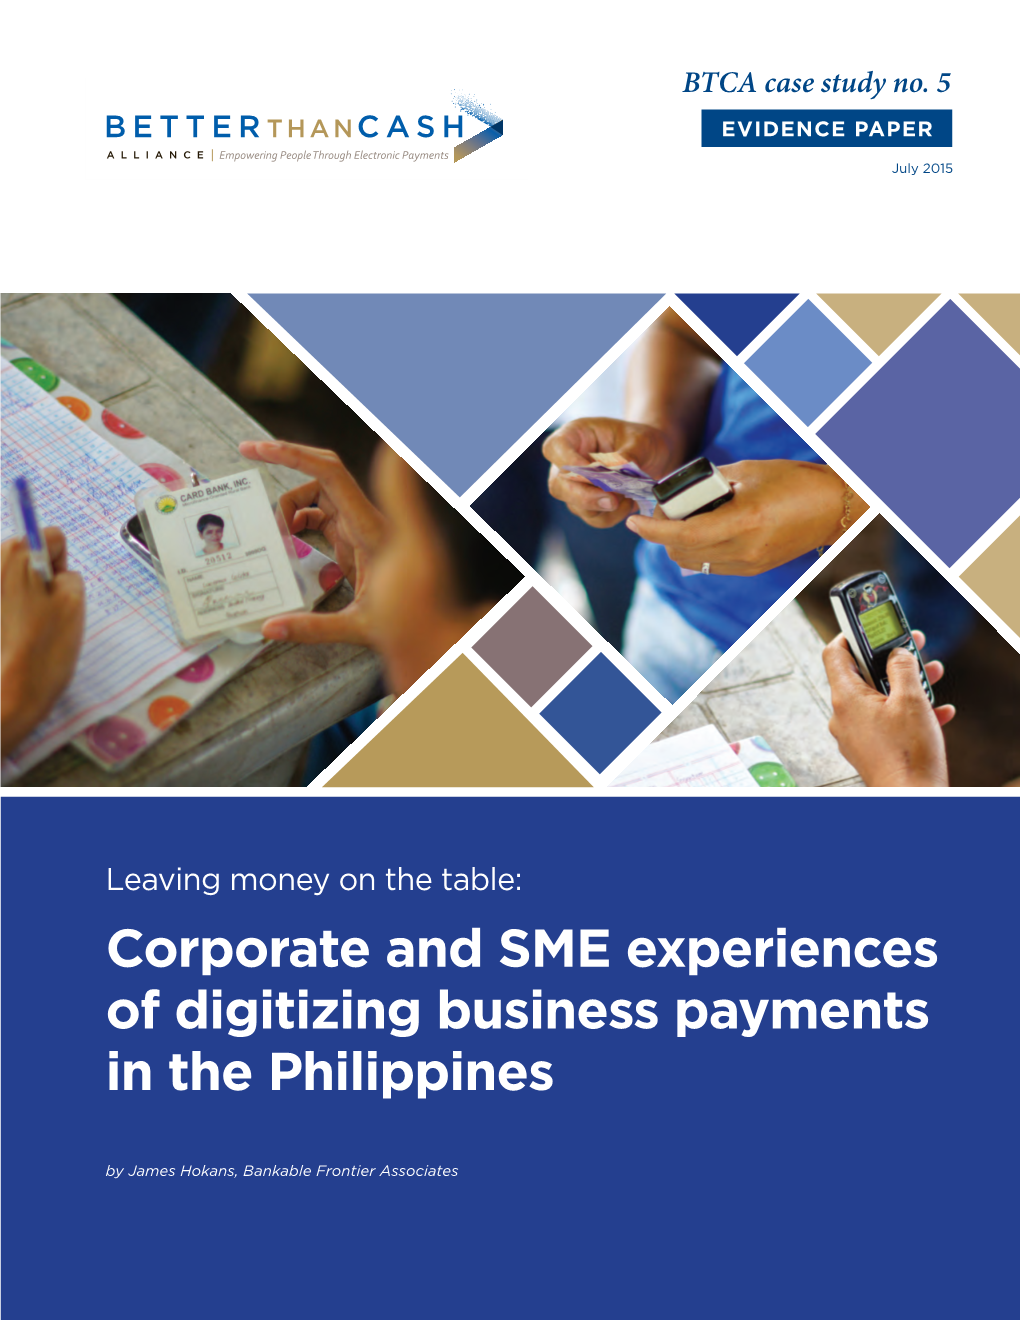 Corporate and SME Experiences of Digitizing Business Payments in the Philippines